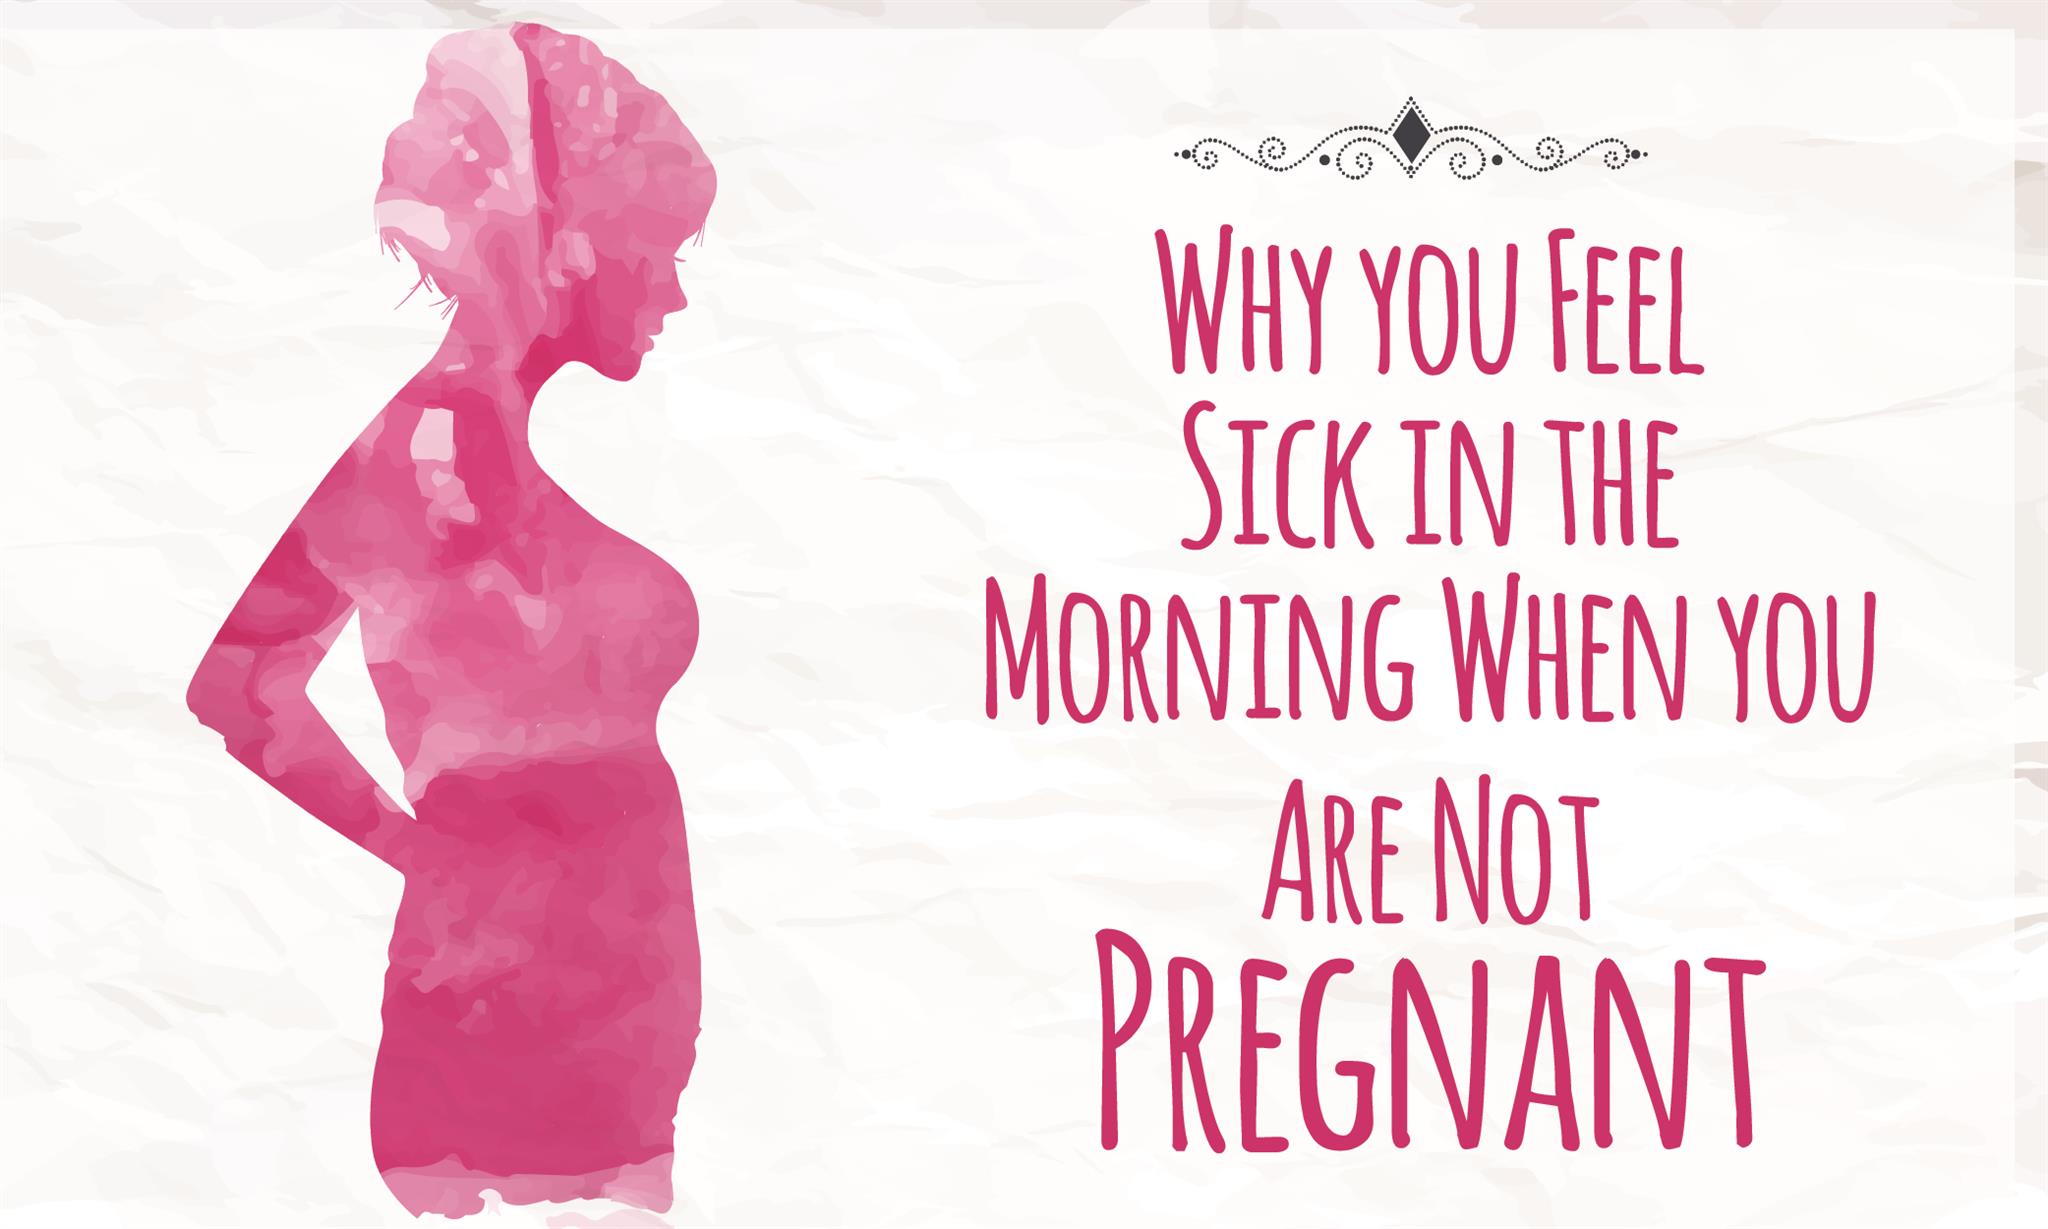 Reasons Why you Feel Sick in the Morning When You Are Not Pregnant